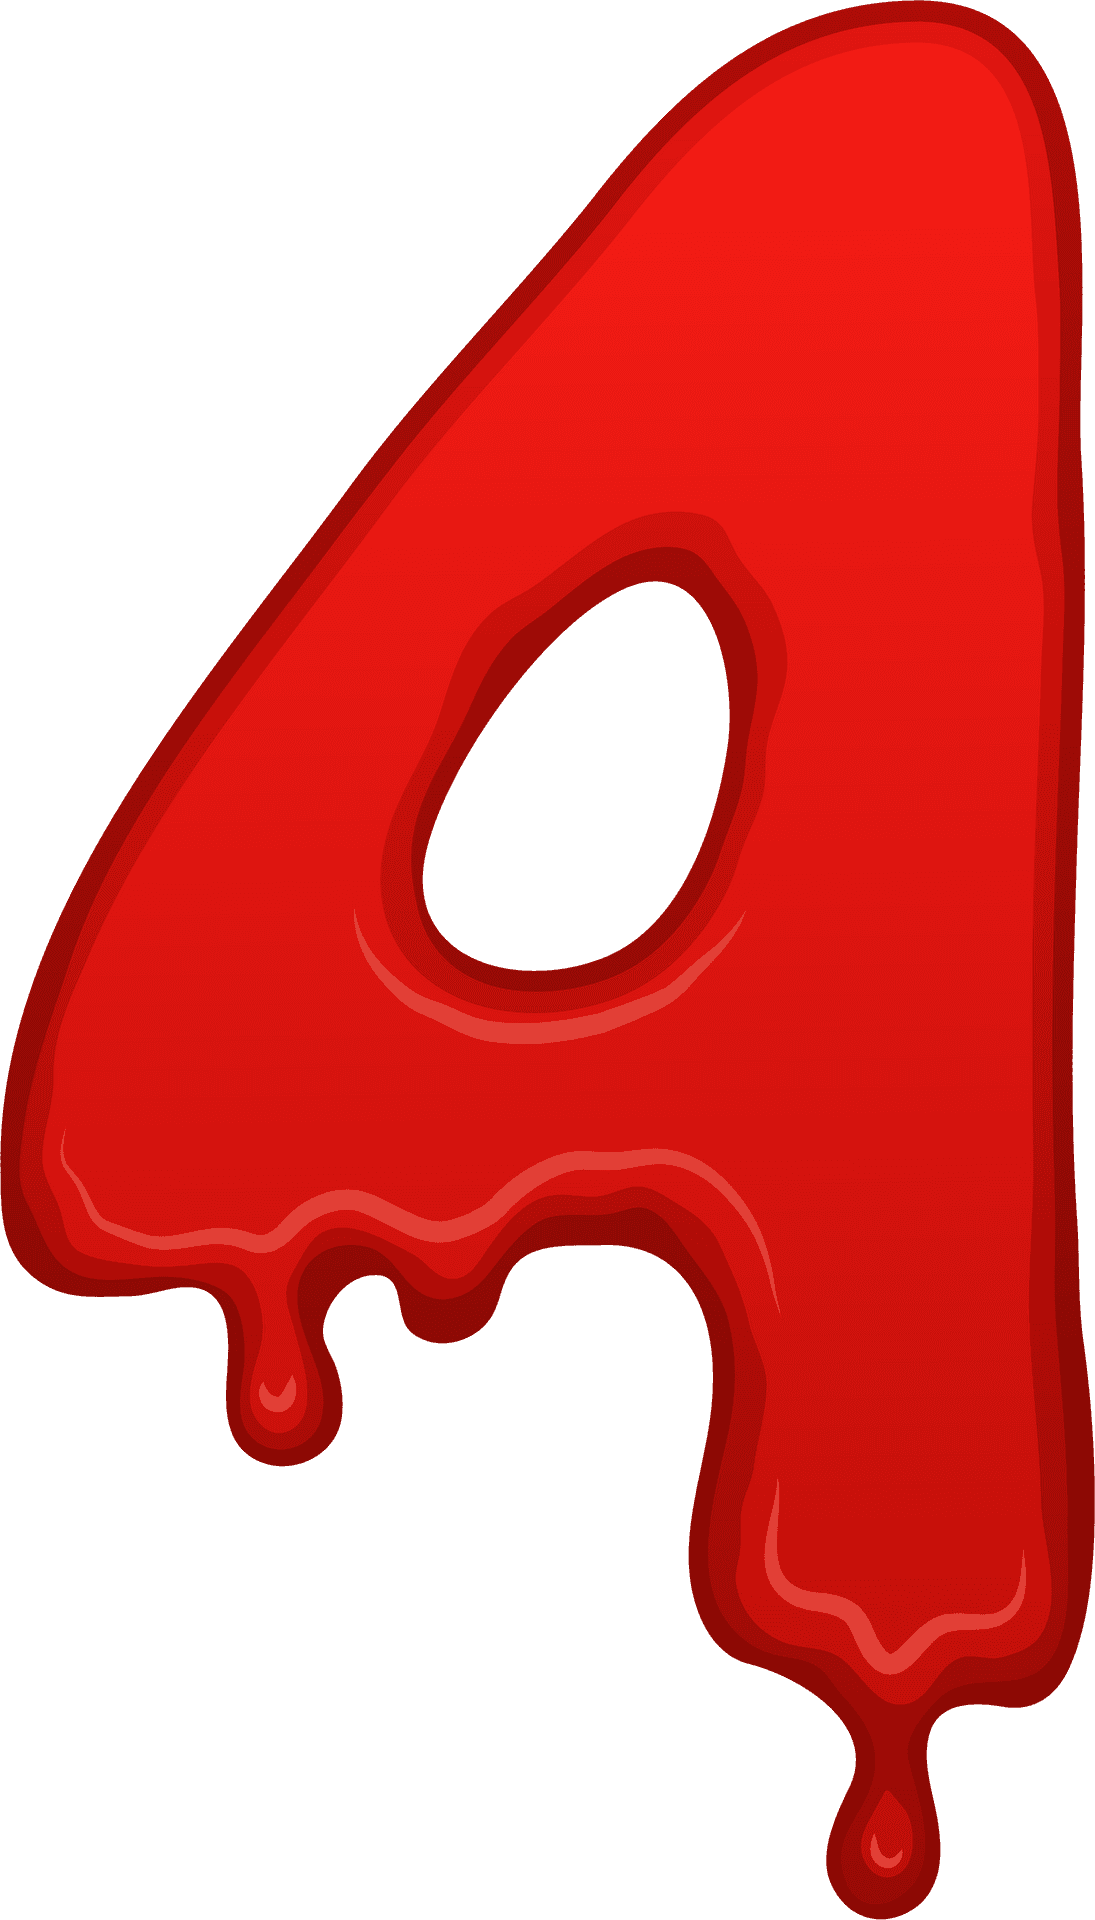 Red Melting Letter A Graphic PNG image